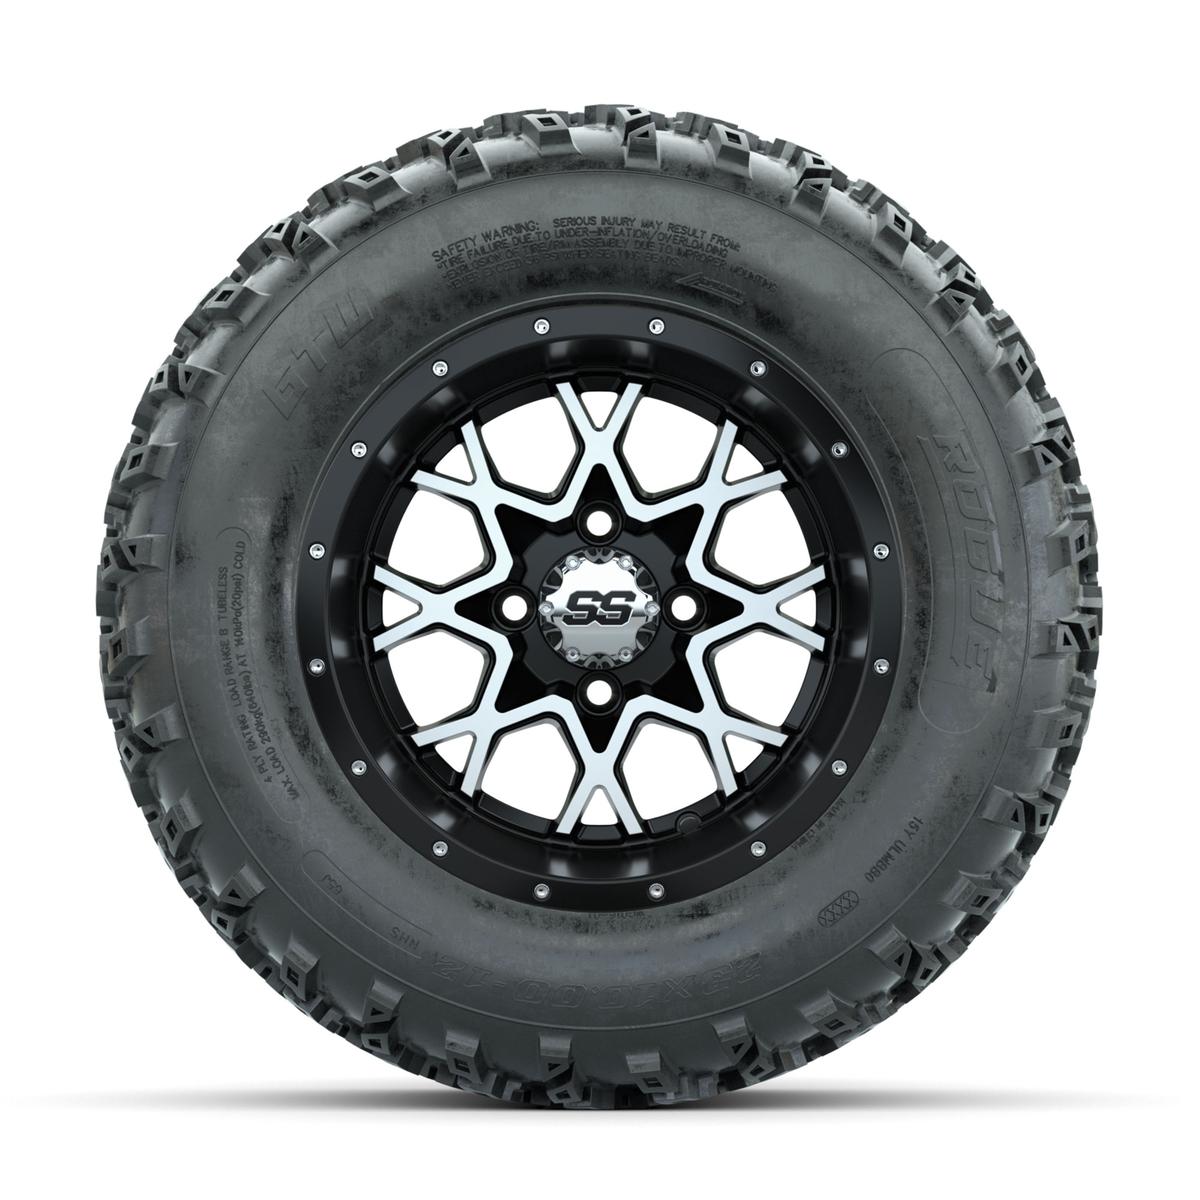 GTW Vortex Machined/Matte Black 12 in Wheels with 23x10.00-12 Rogue All Terrain Tires – Full Set